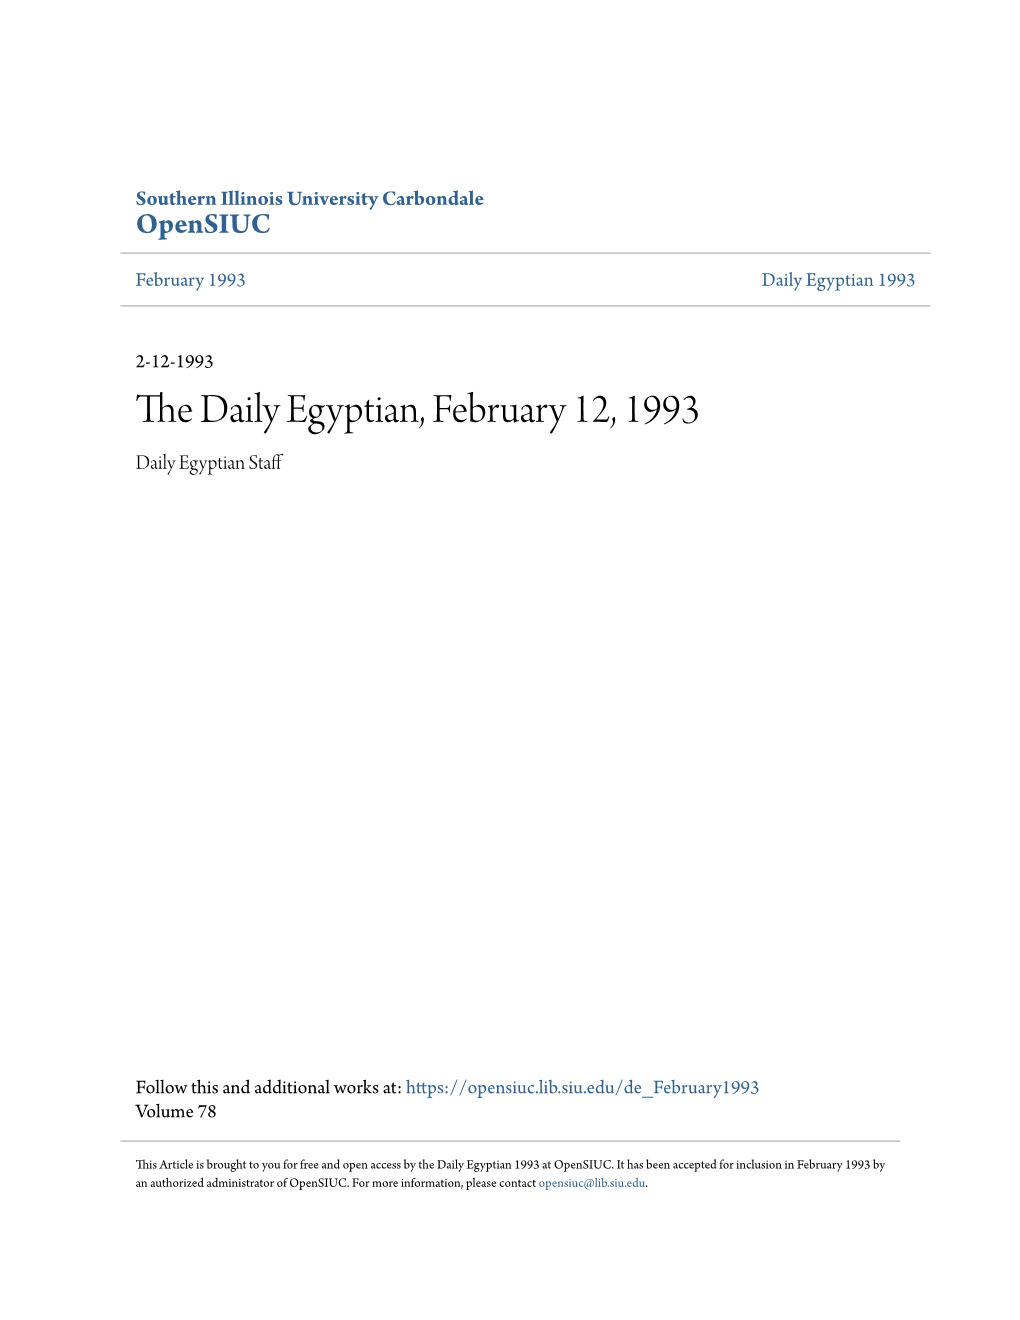 The Daily Egyptian, February 12, 1993